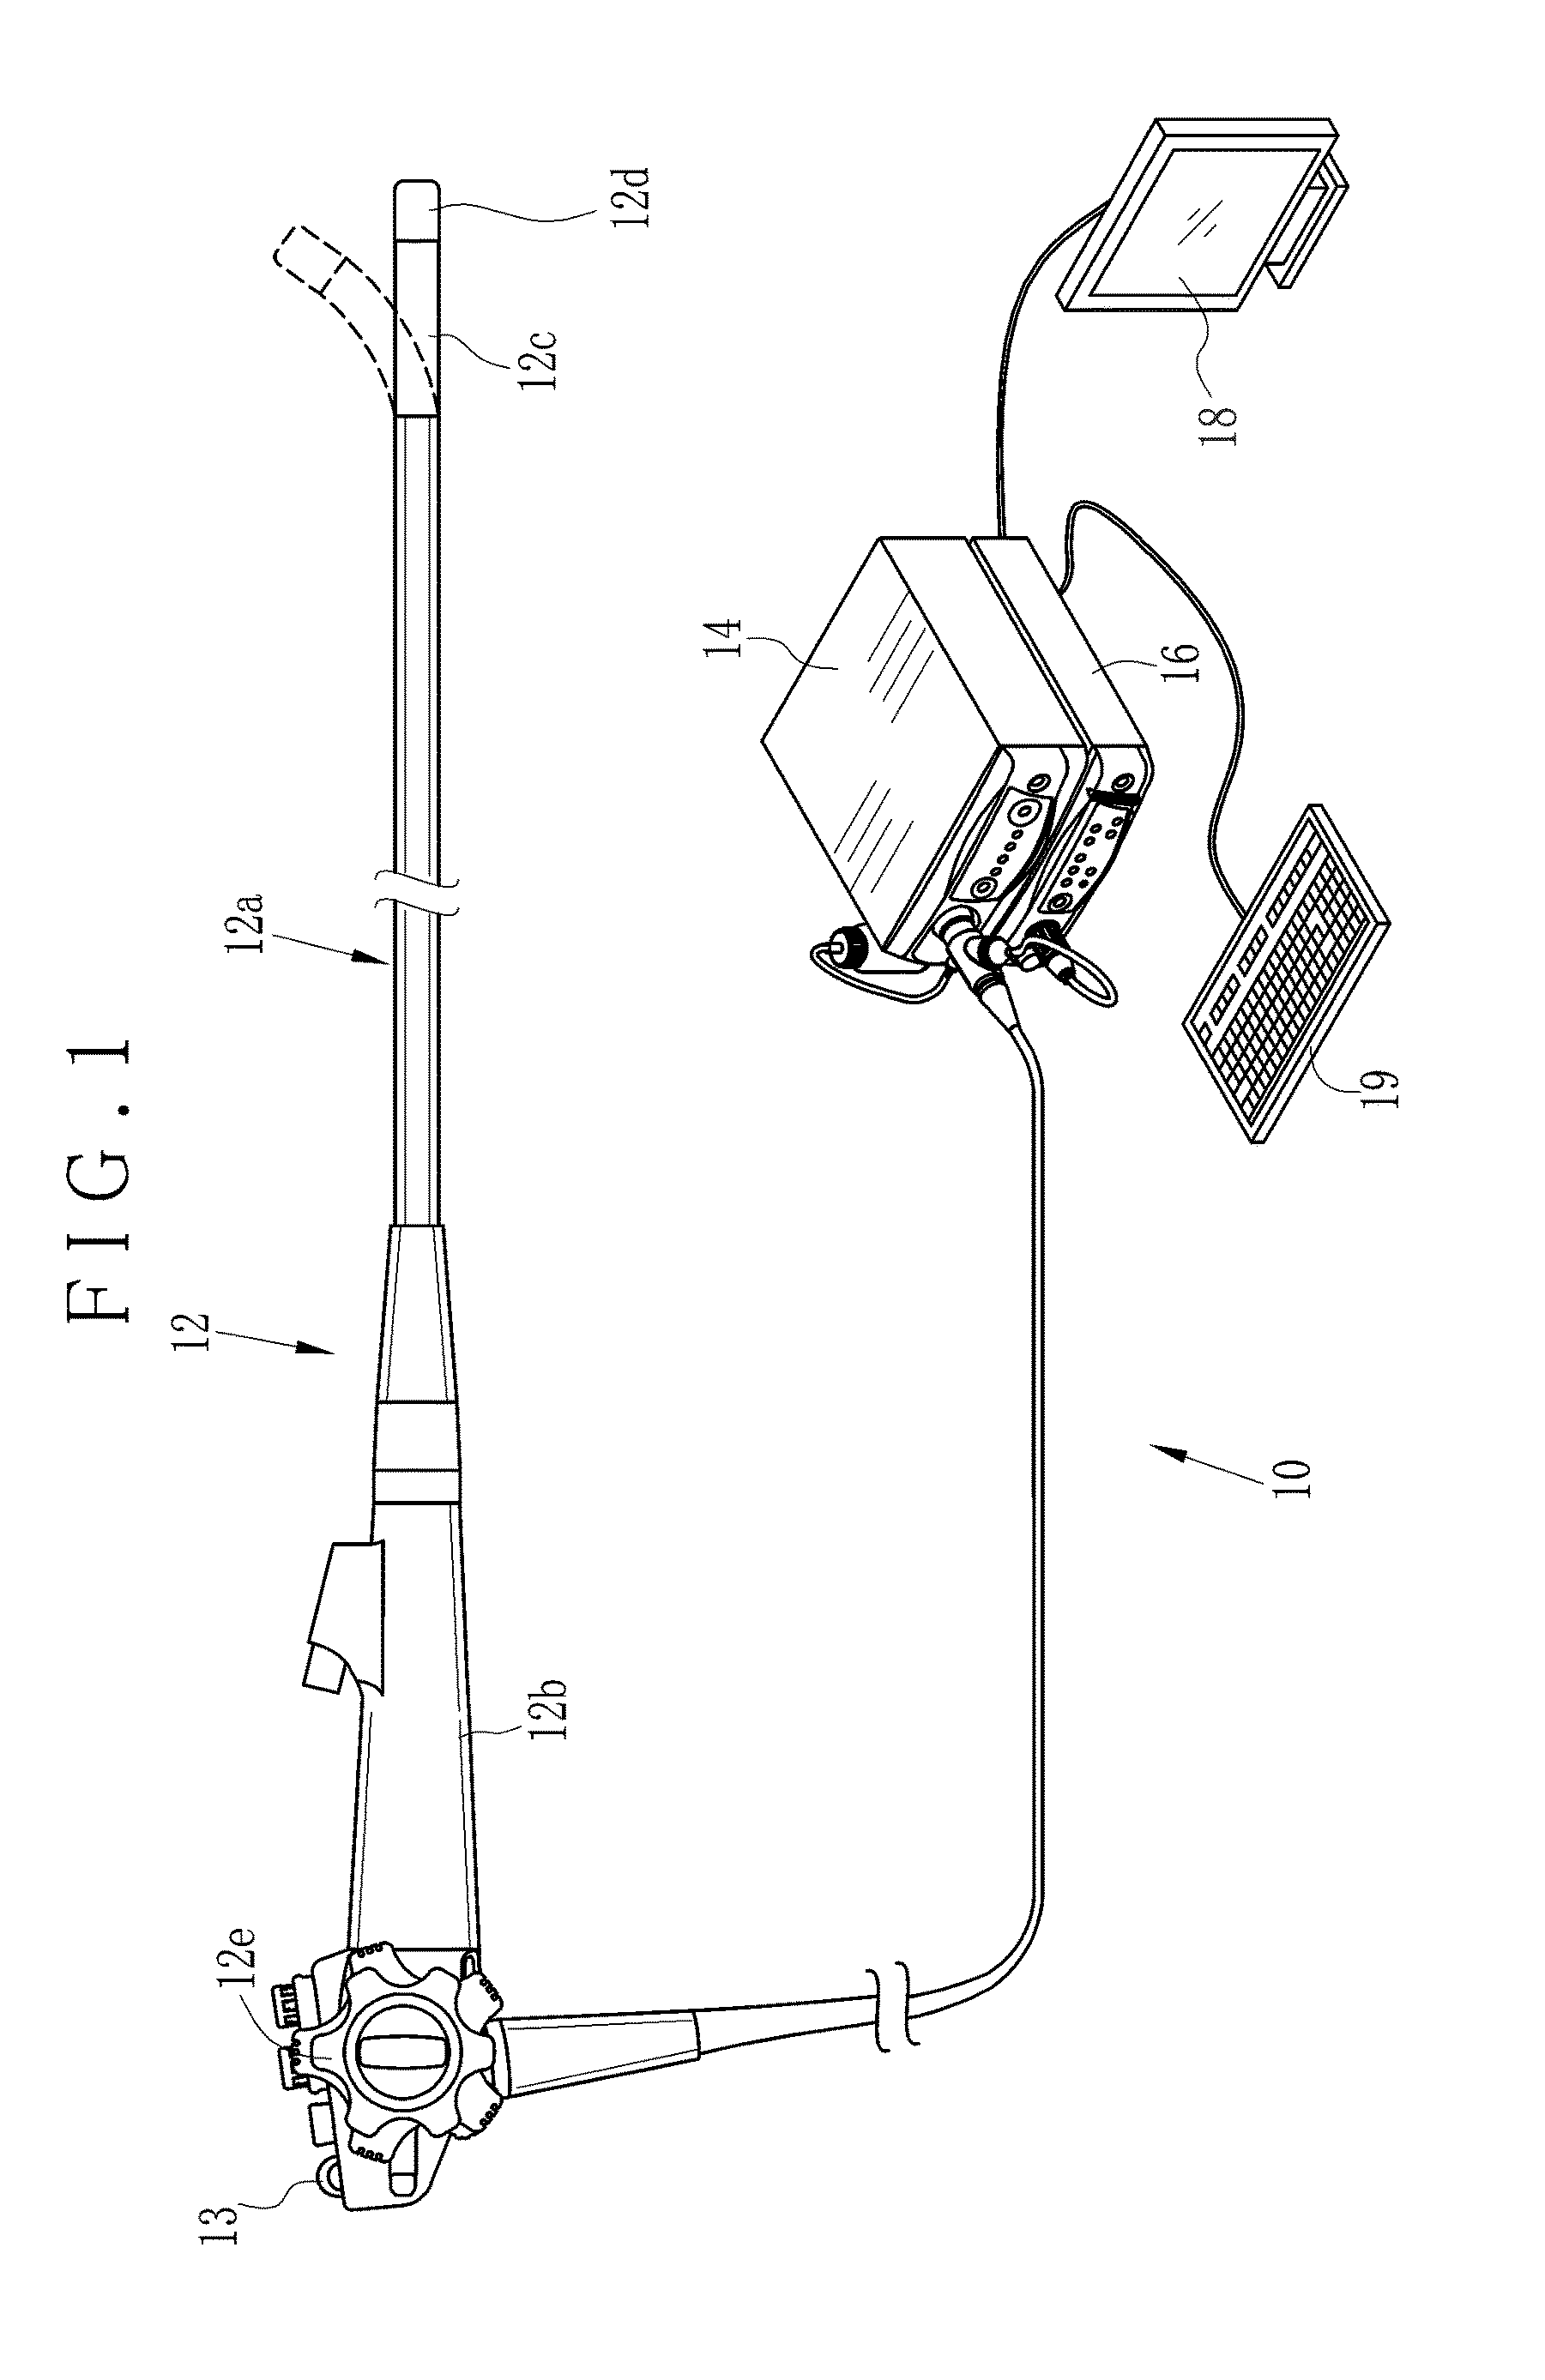 Endoscope system and method of operating endoscope system